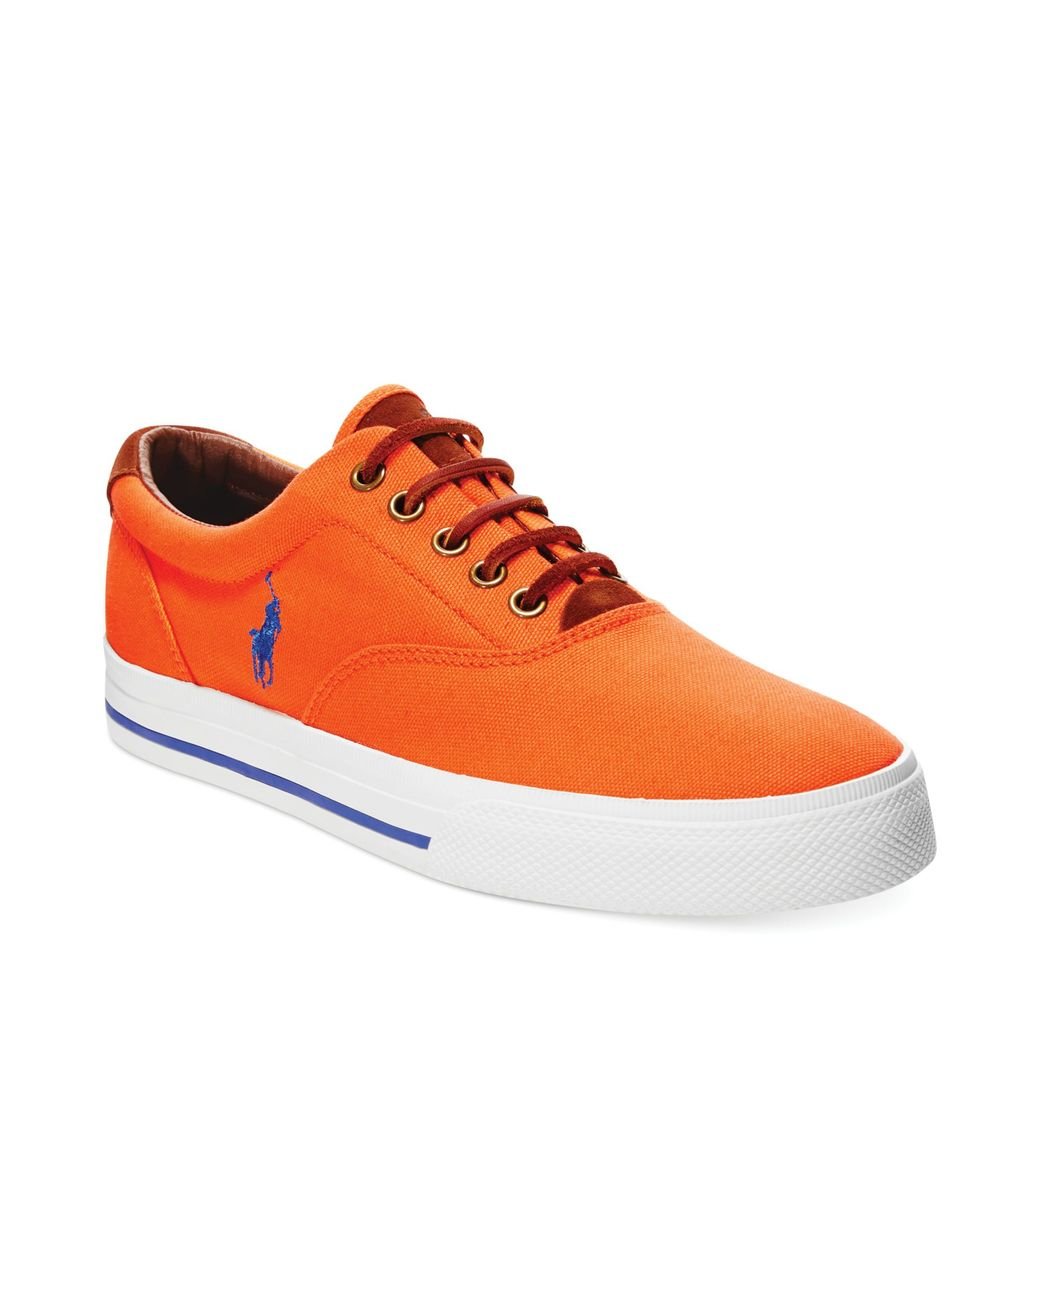 Ralph Polo Vaughn and Sneakers Orange for Men | Lyst